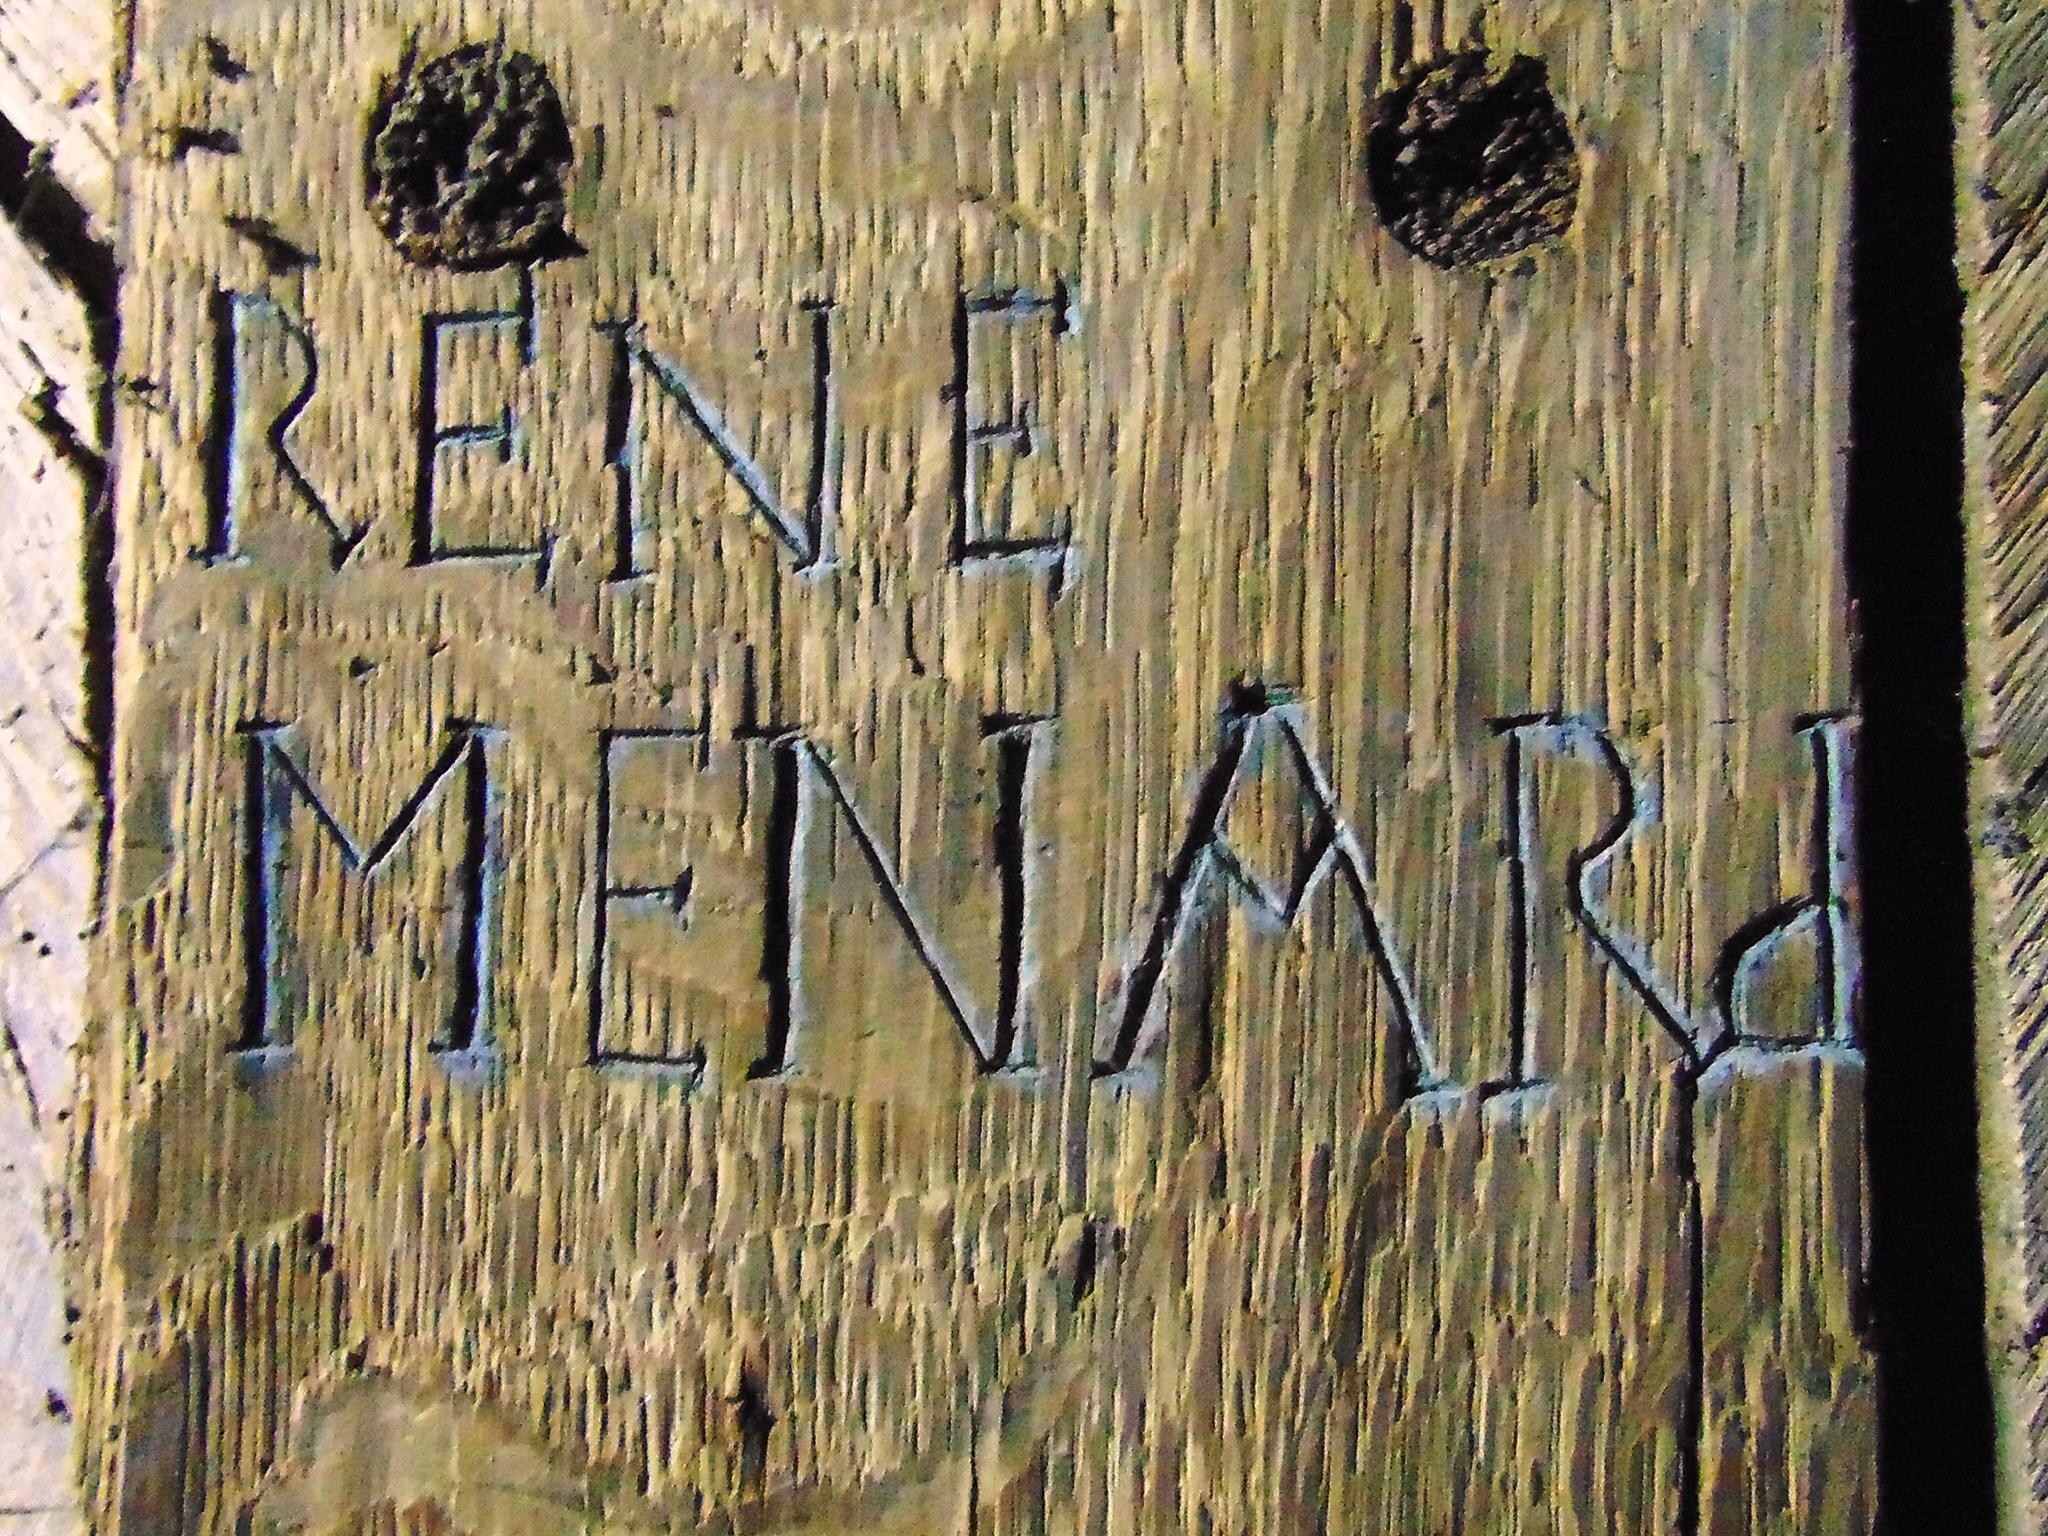 A carving thought to be the name of a prisoner